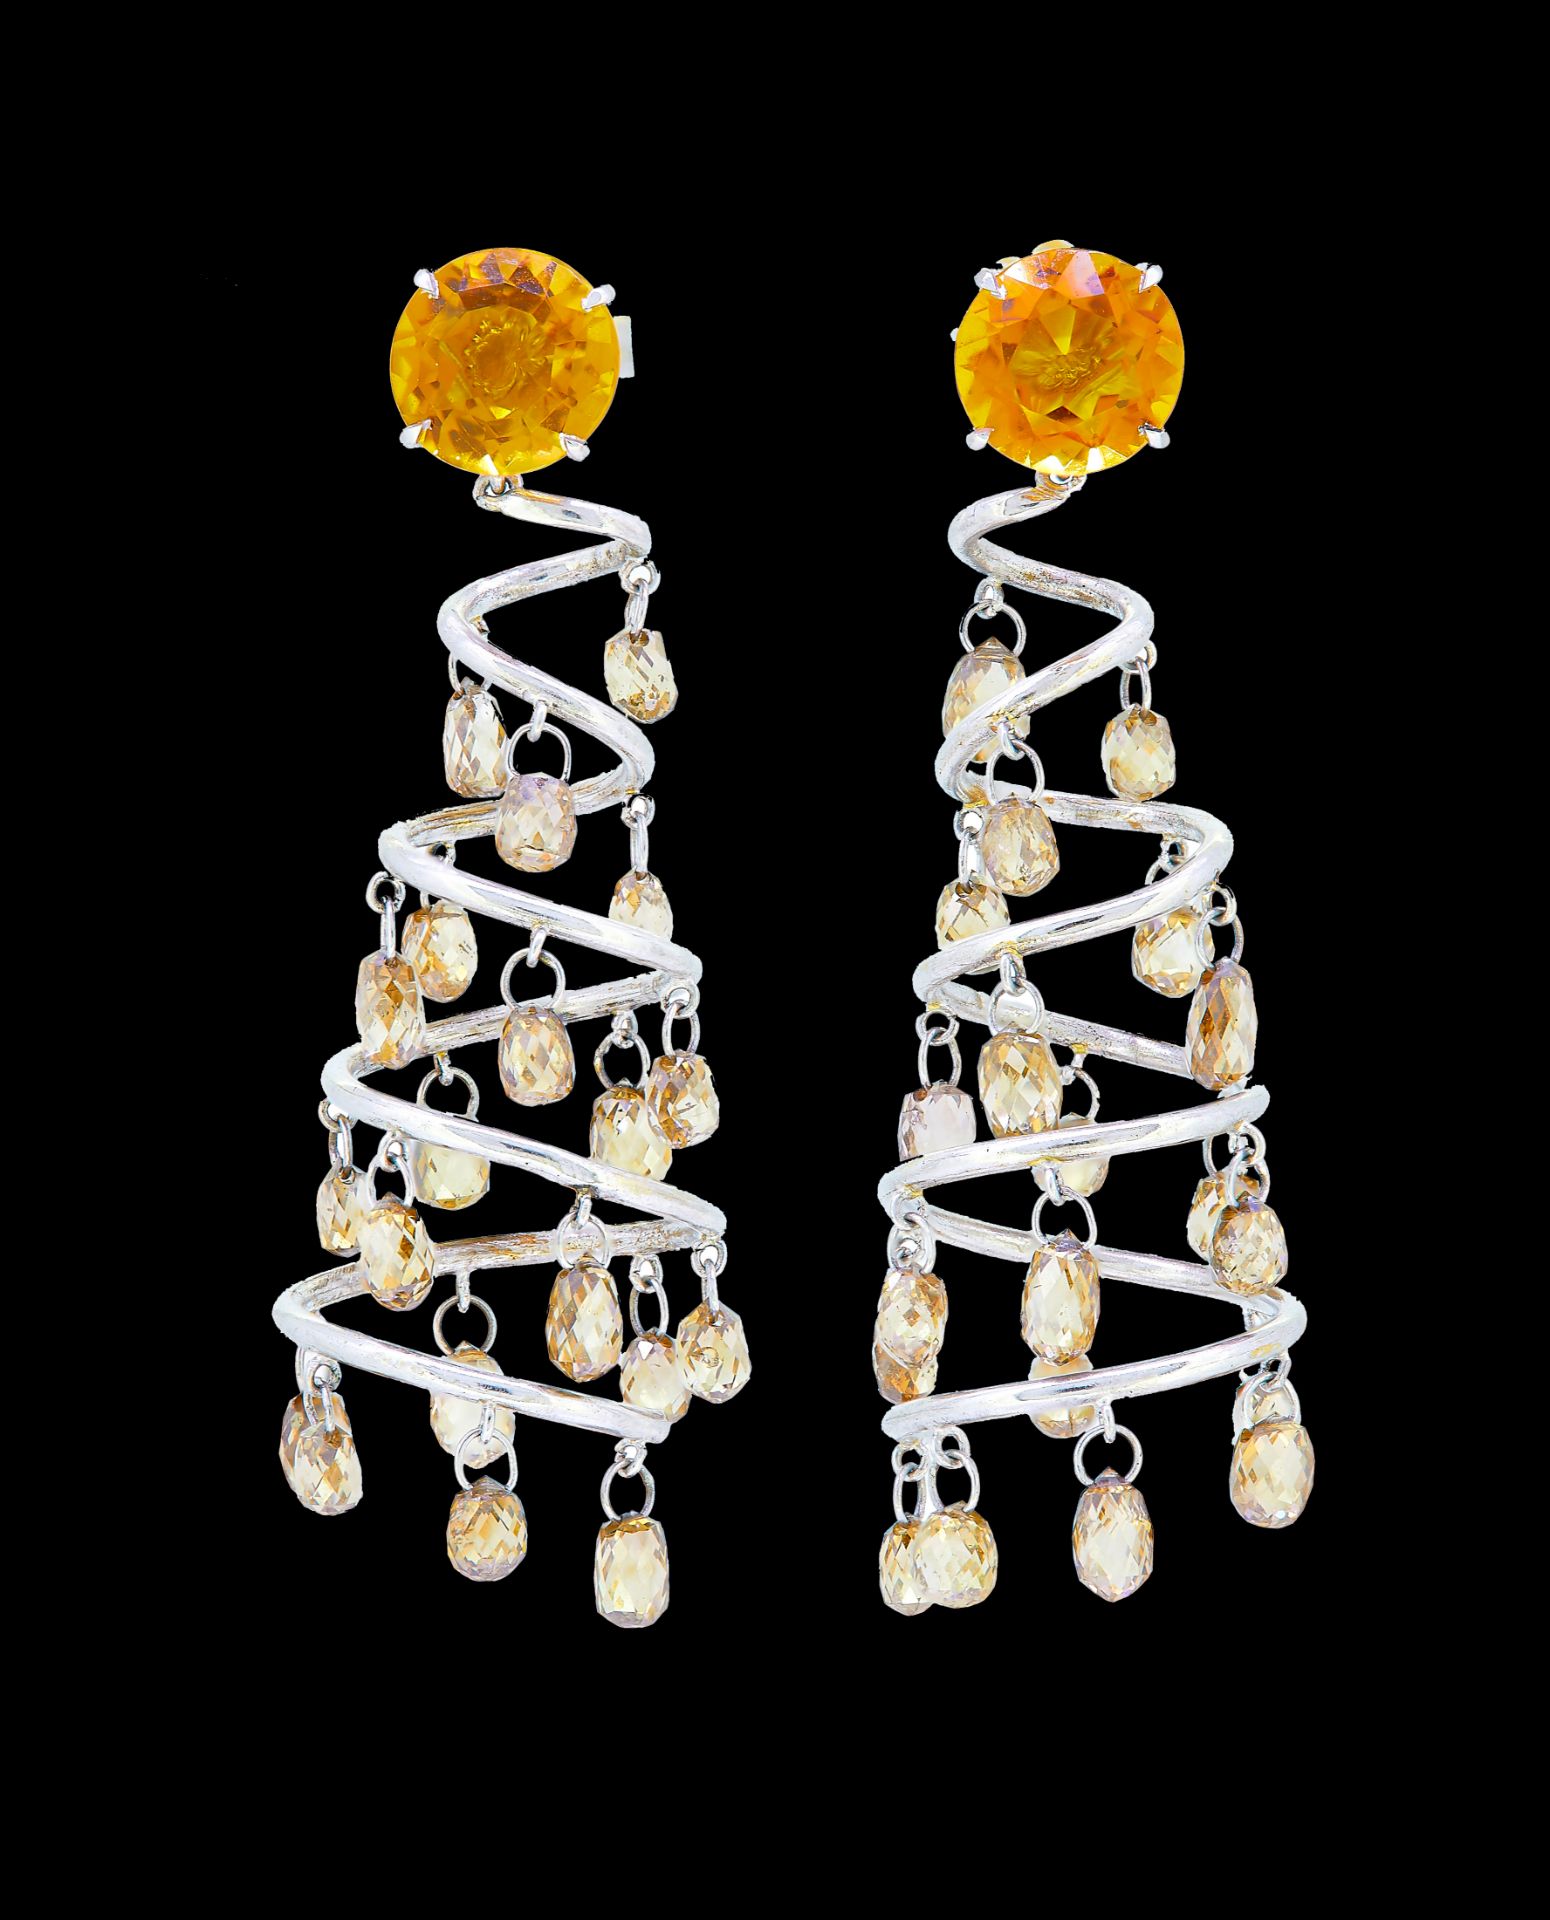 PAIR OF CITRINE AND DIAMOND SPIRAL EARRINGS